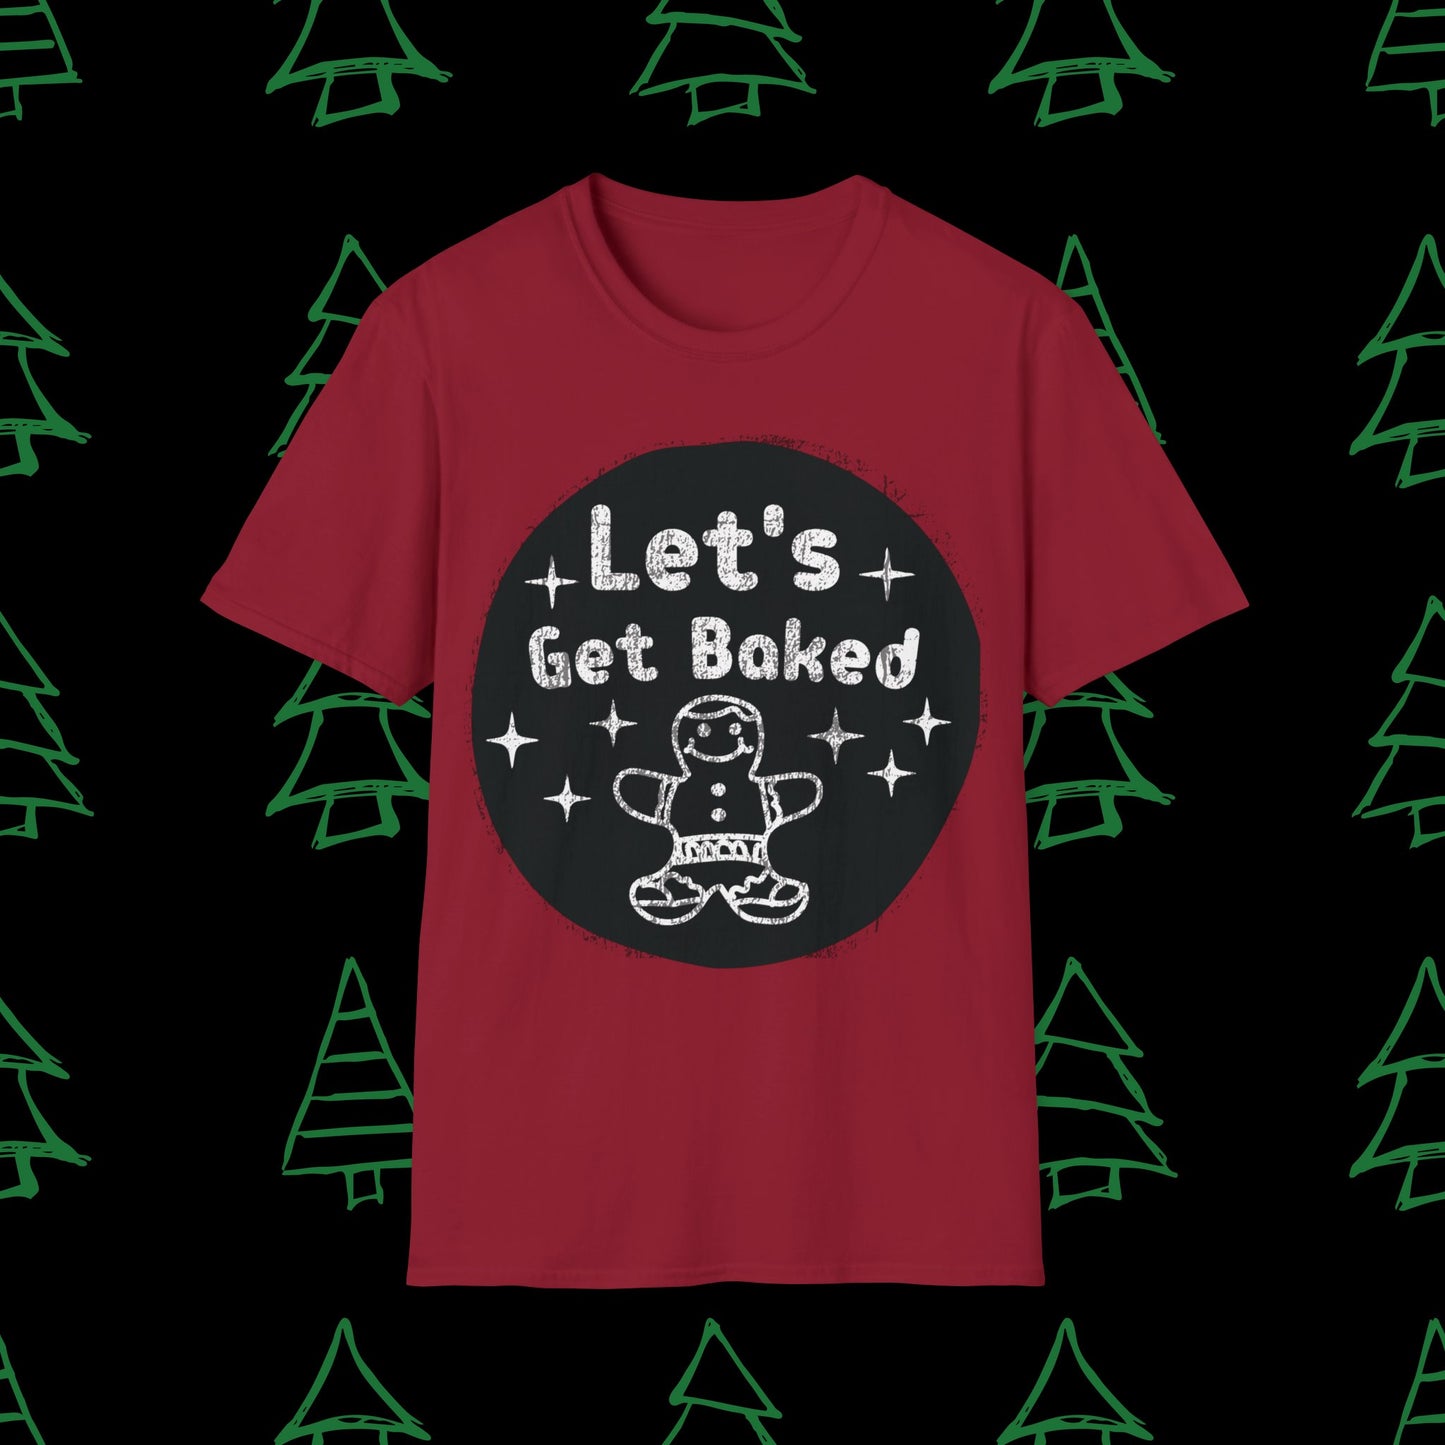 Christmas T-Shirt - Let's Get Baked - Mens Christmas Shirts - Adult Christmas TShirts T-Shirts Graphic Avenue Cardinal Red Adult Small 